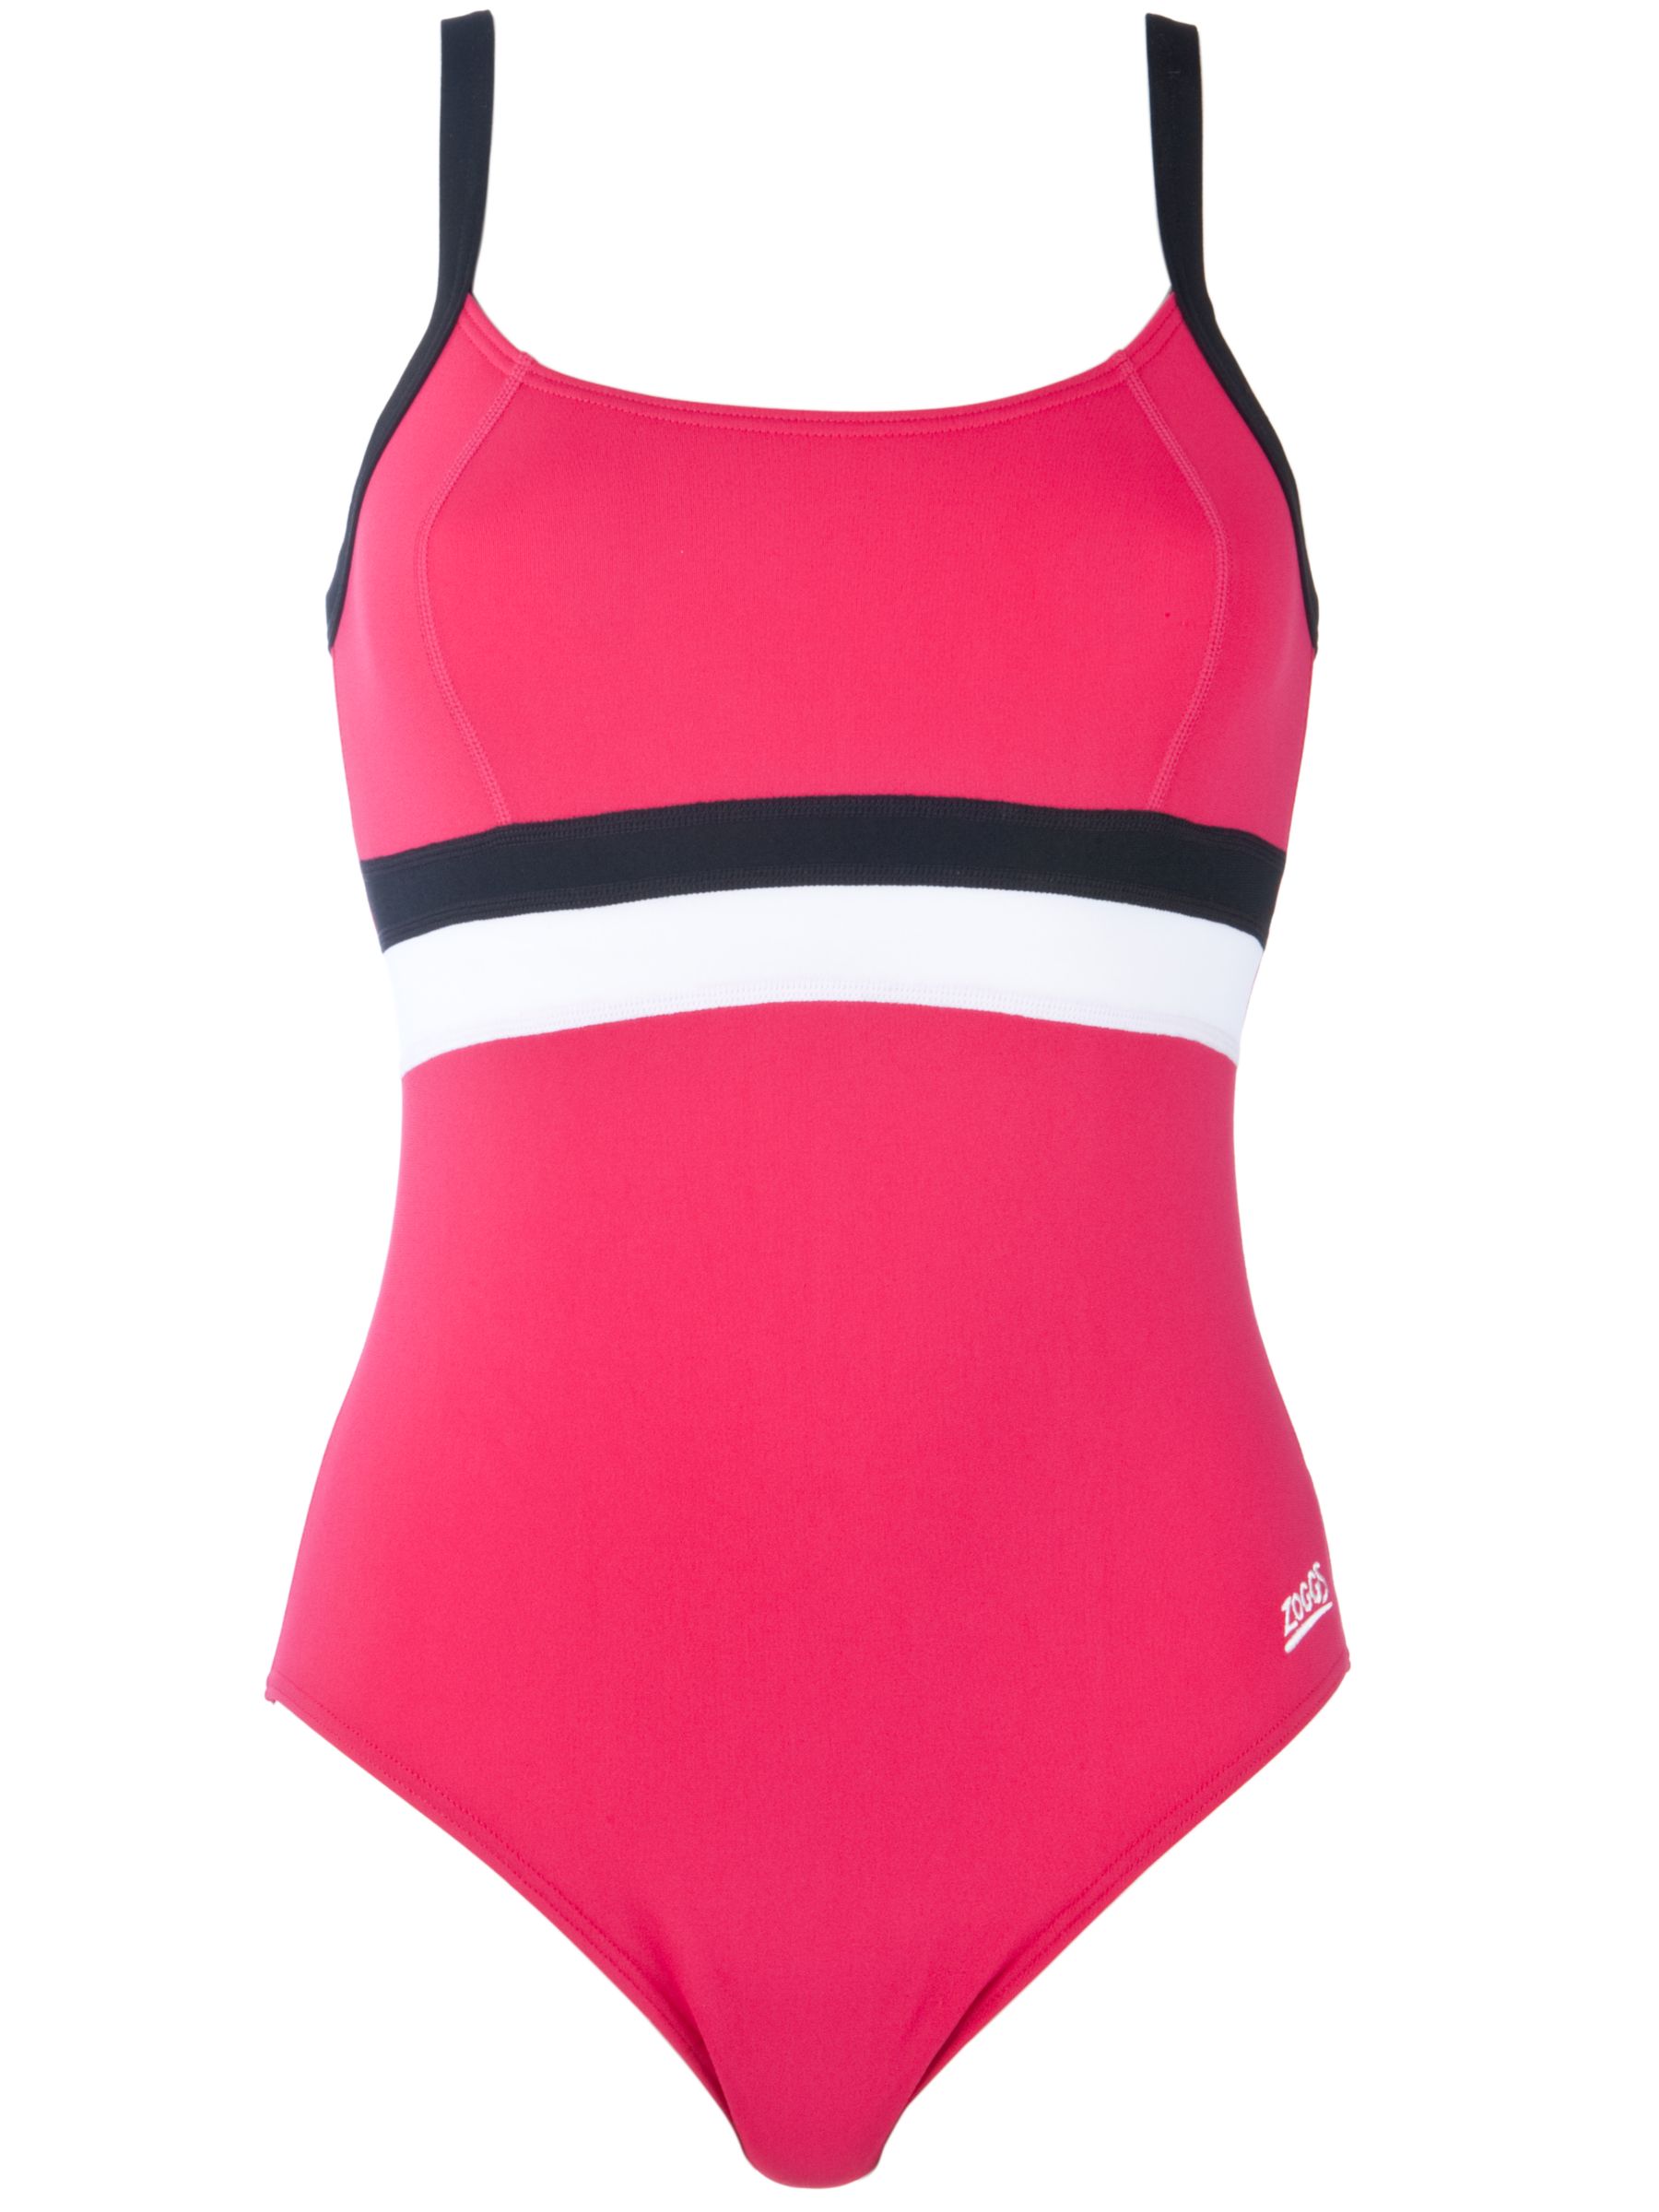 Torquay Scoopback One Piece Swimsuit, Pink